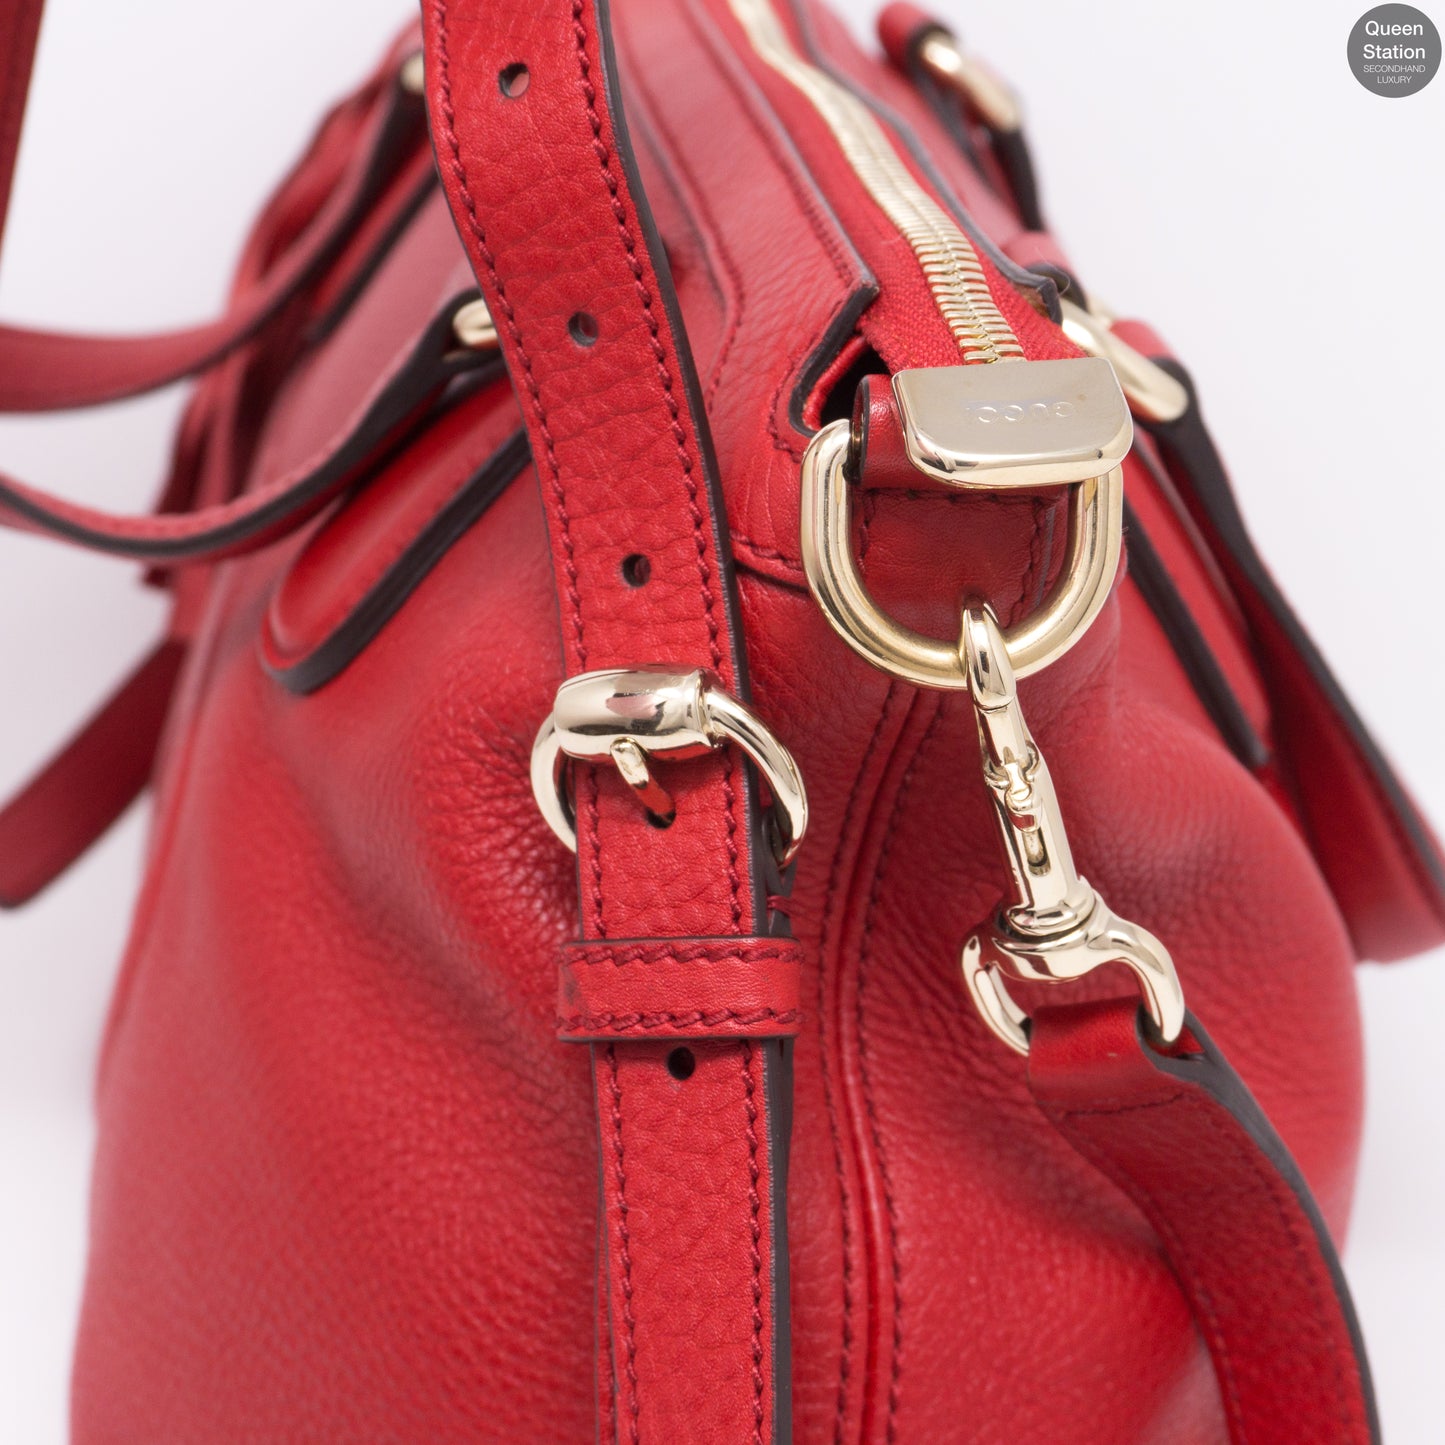 Soho Two Way Red Leather